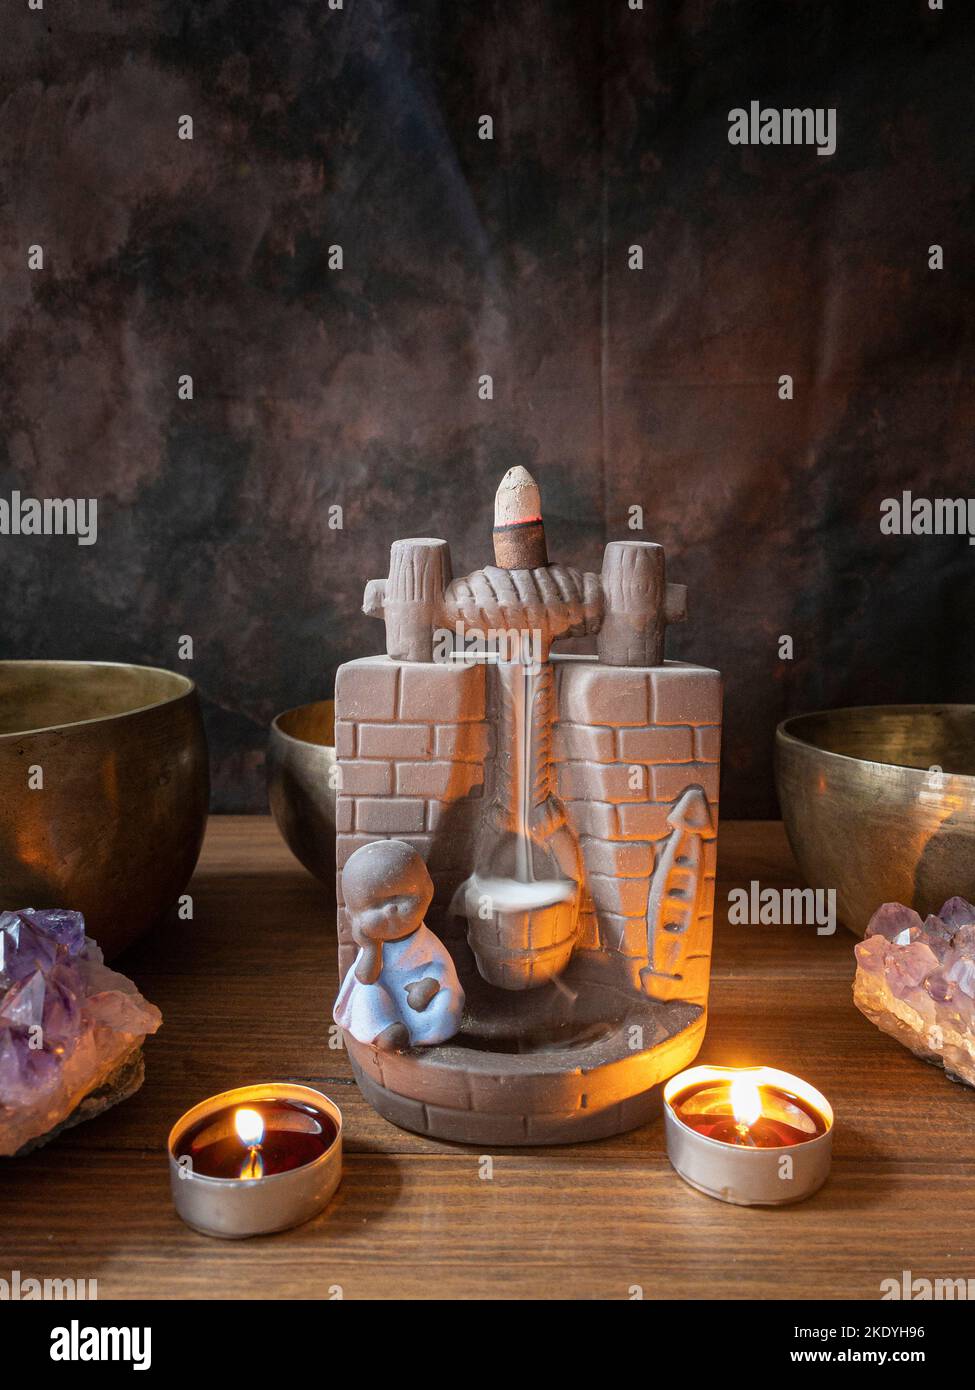 Still life with incense burner with cascade of reflux incense, candles, druses and Tibetan bowls, on wooden table and dark background. Stock Photo